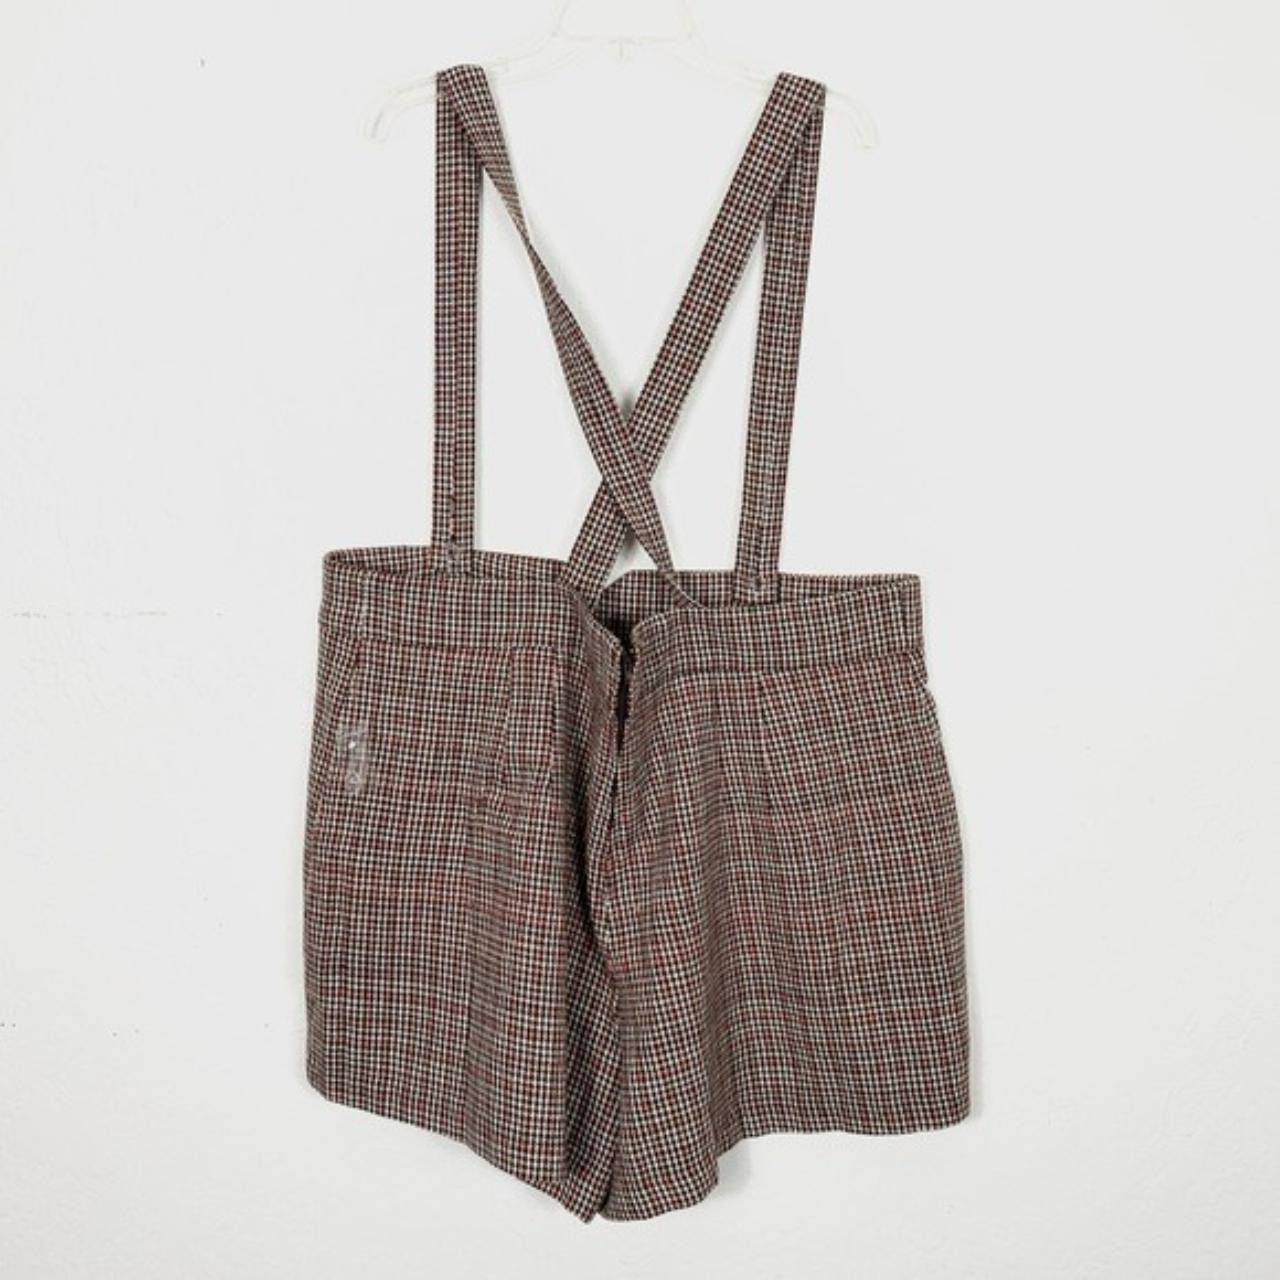 Product Image 2 - ModCloth Brown Tweed Houndstooth Pinafore